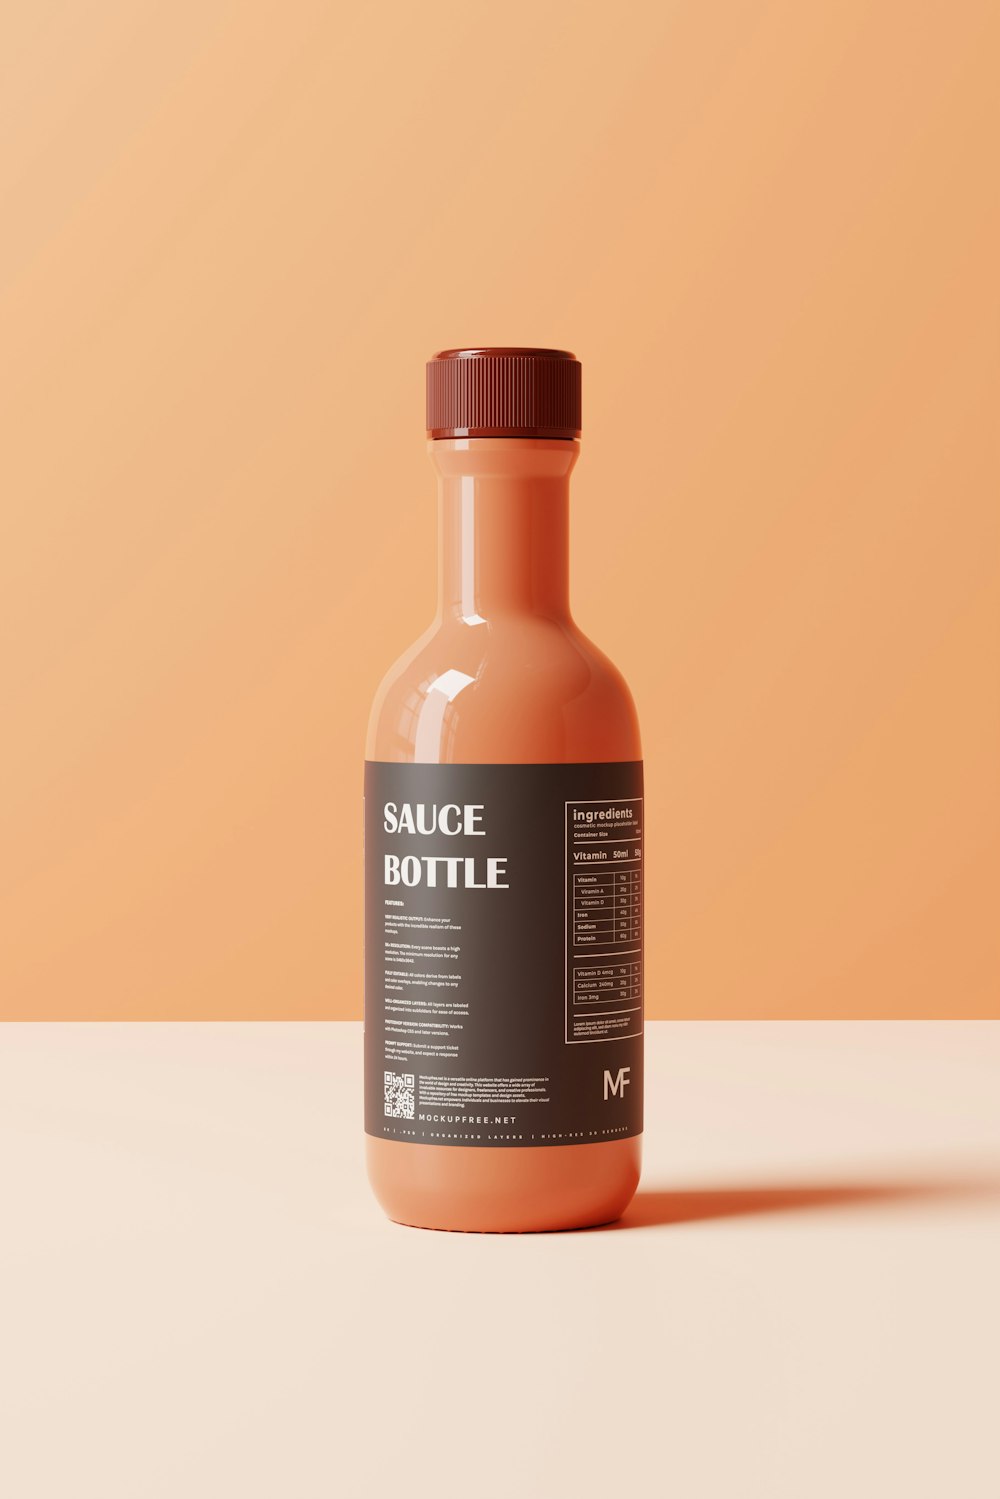 a bottle of sauce sitting on top of a table